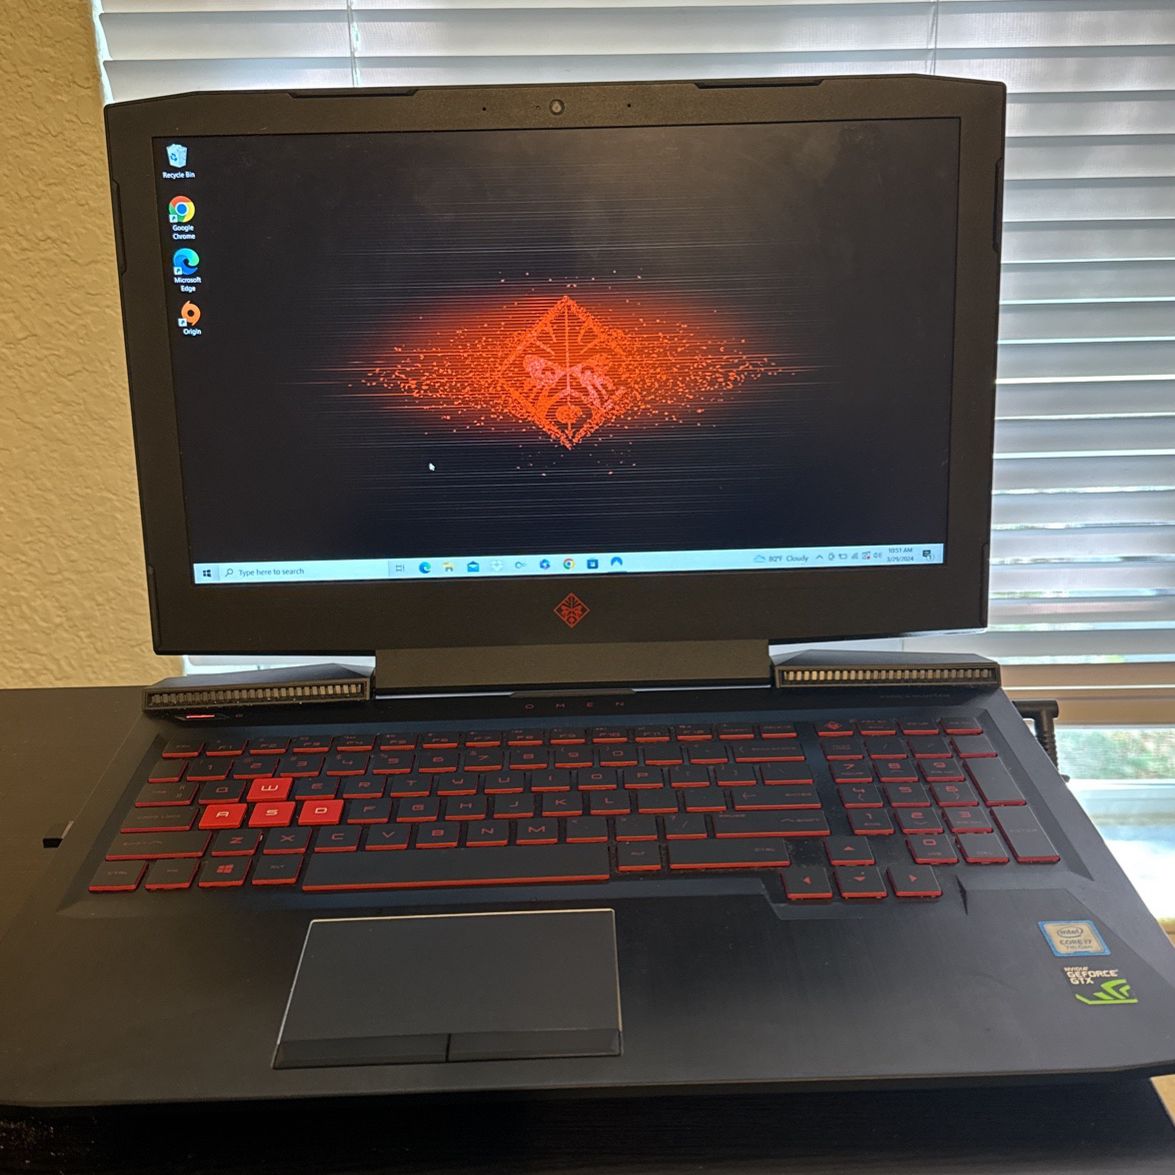 HP Omen Laptop 15” Intel I7 Processor. More Specs In The Photos